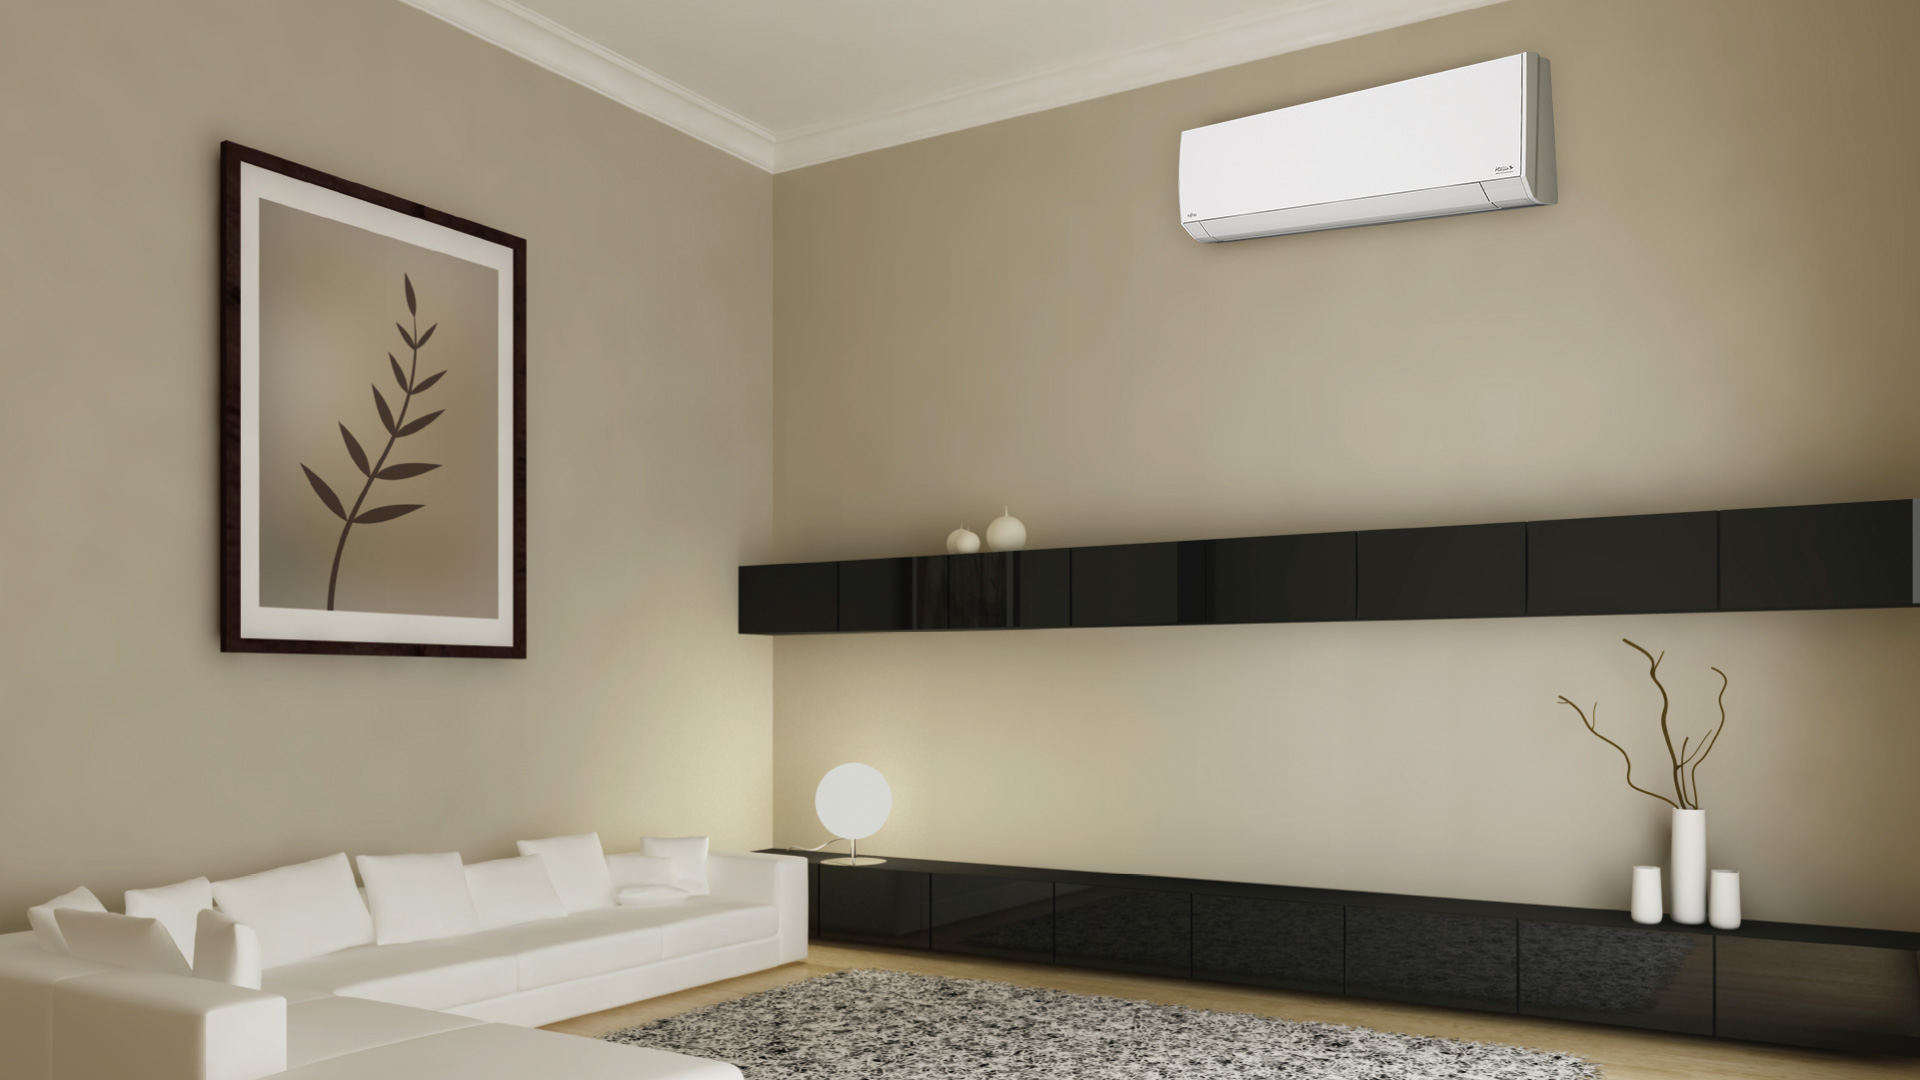 Halcyon Single Room Mini Split Systems Air Conditioner And